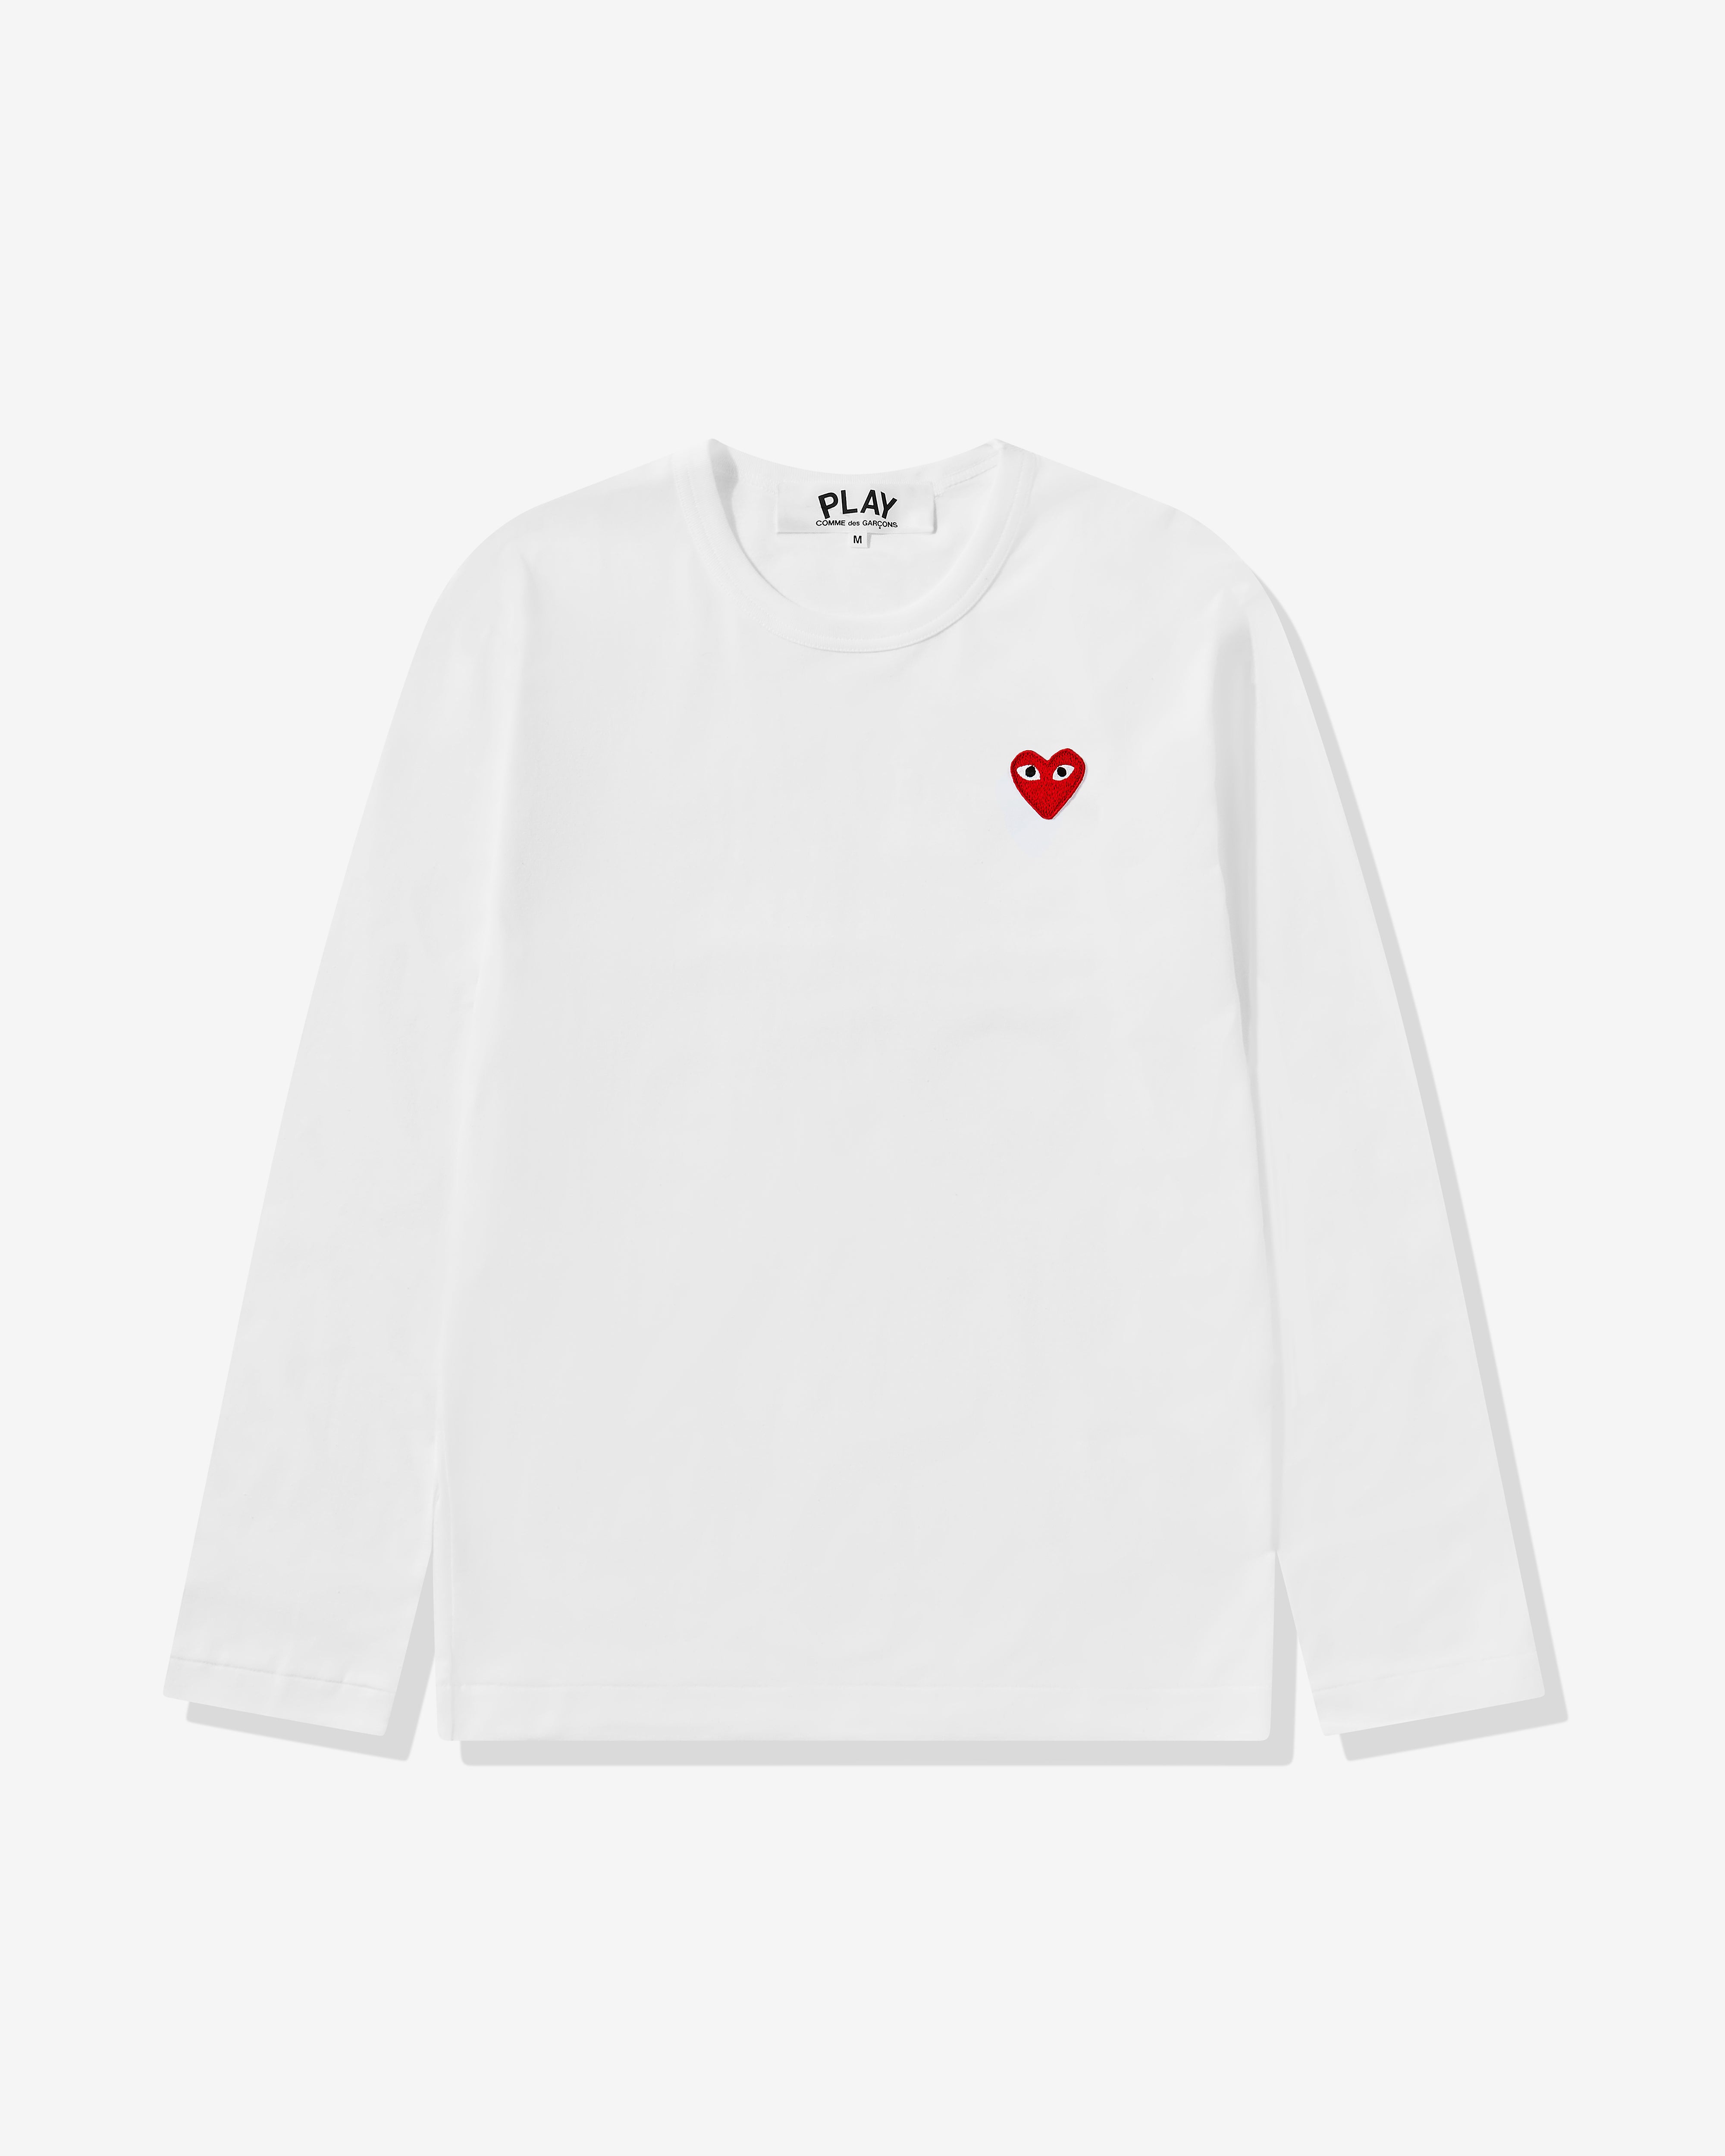 Comme des Garcons Play Logo Patch Short-Sleeve Tee Grey/Red